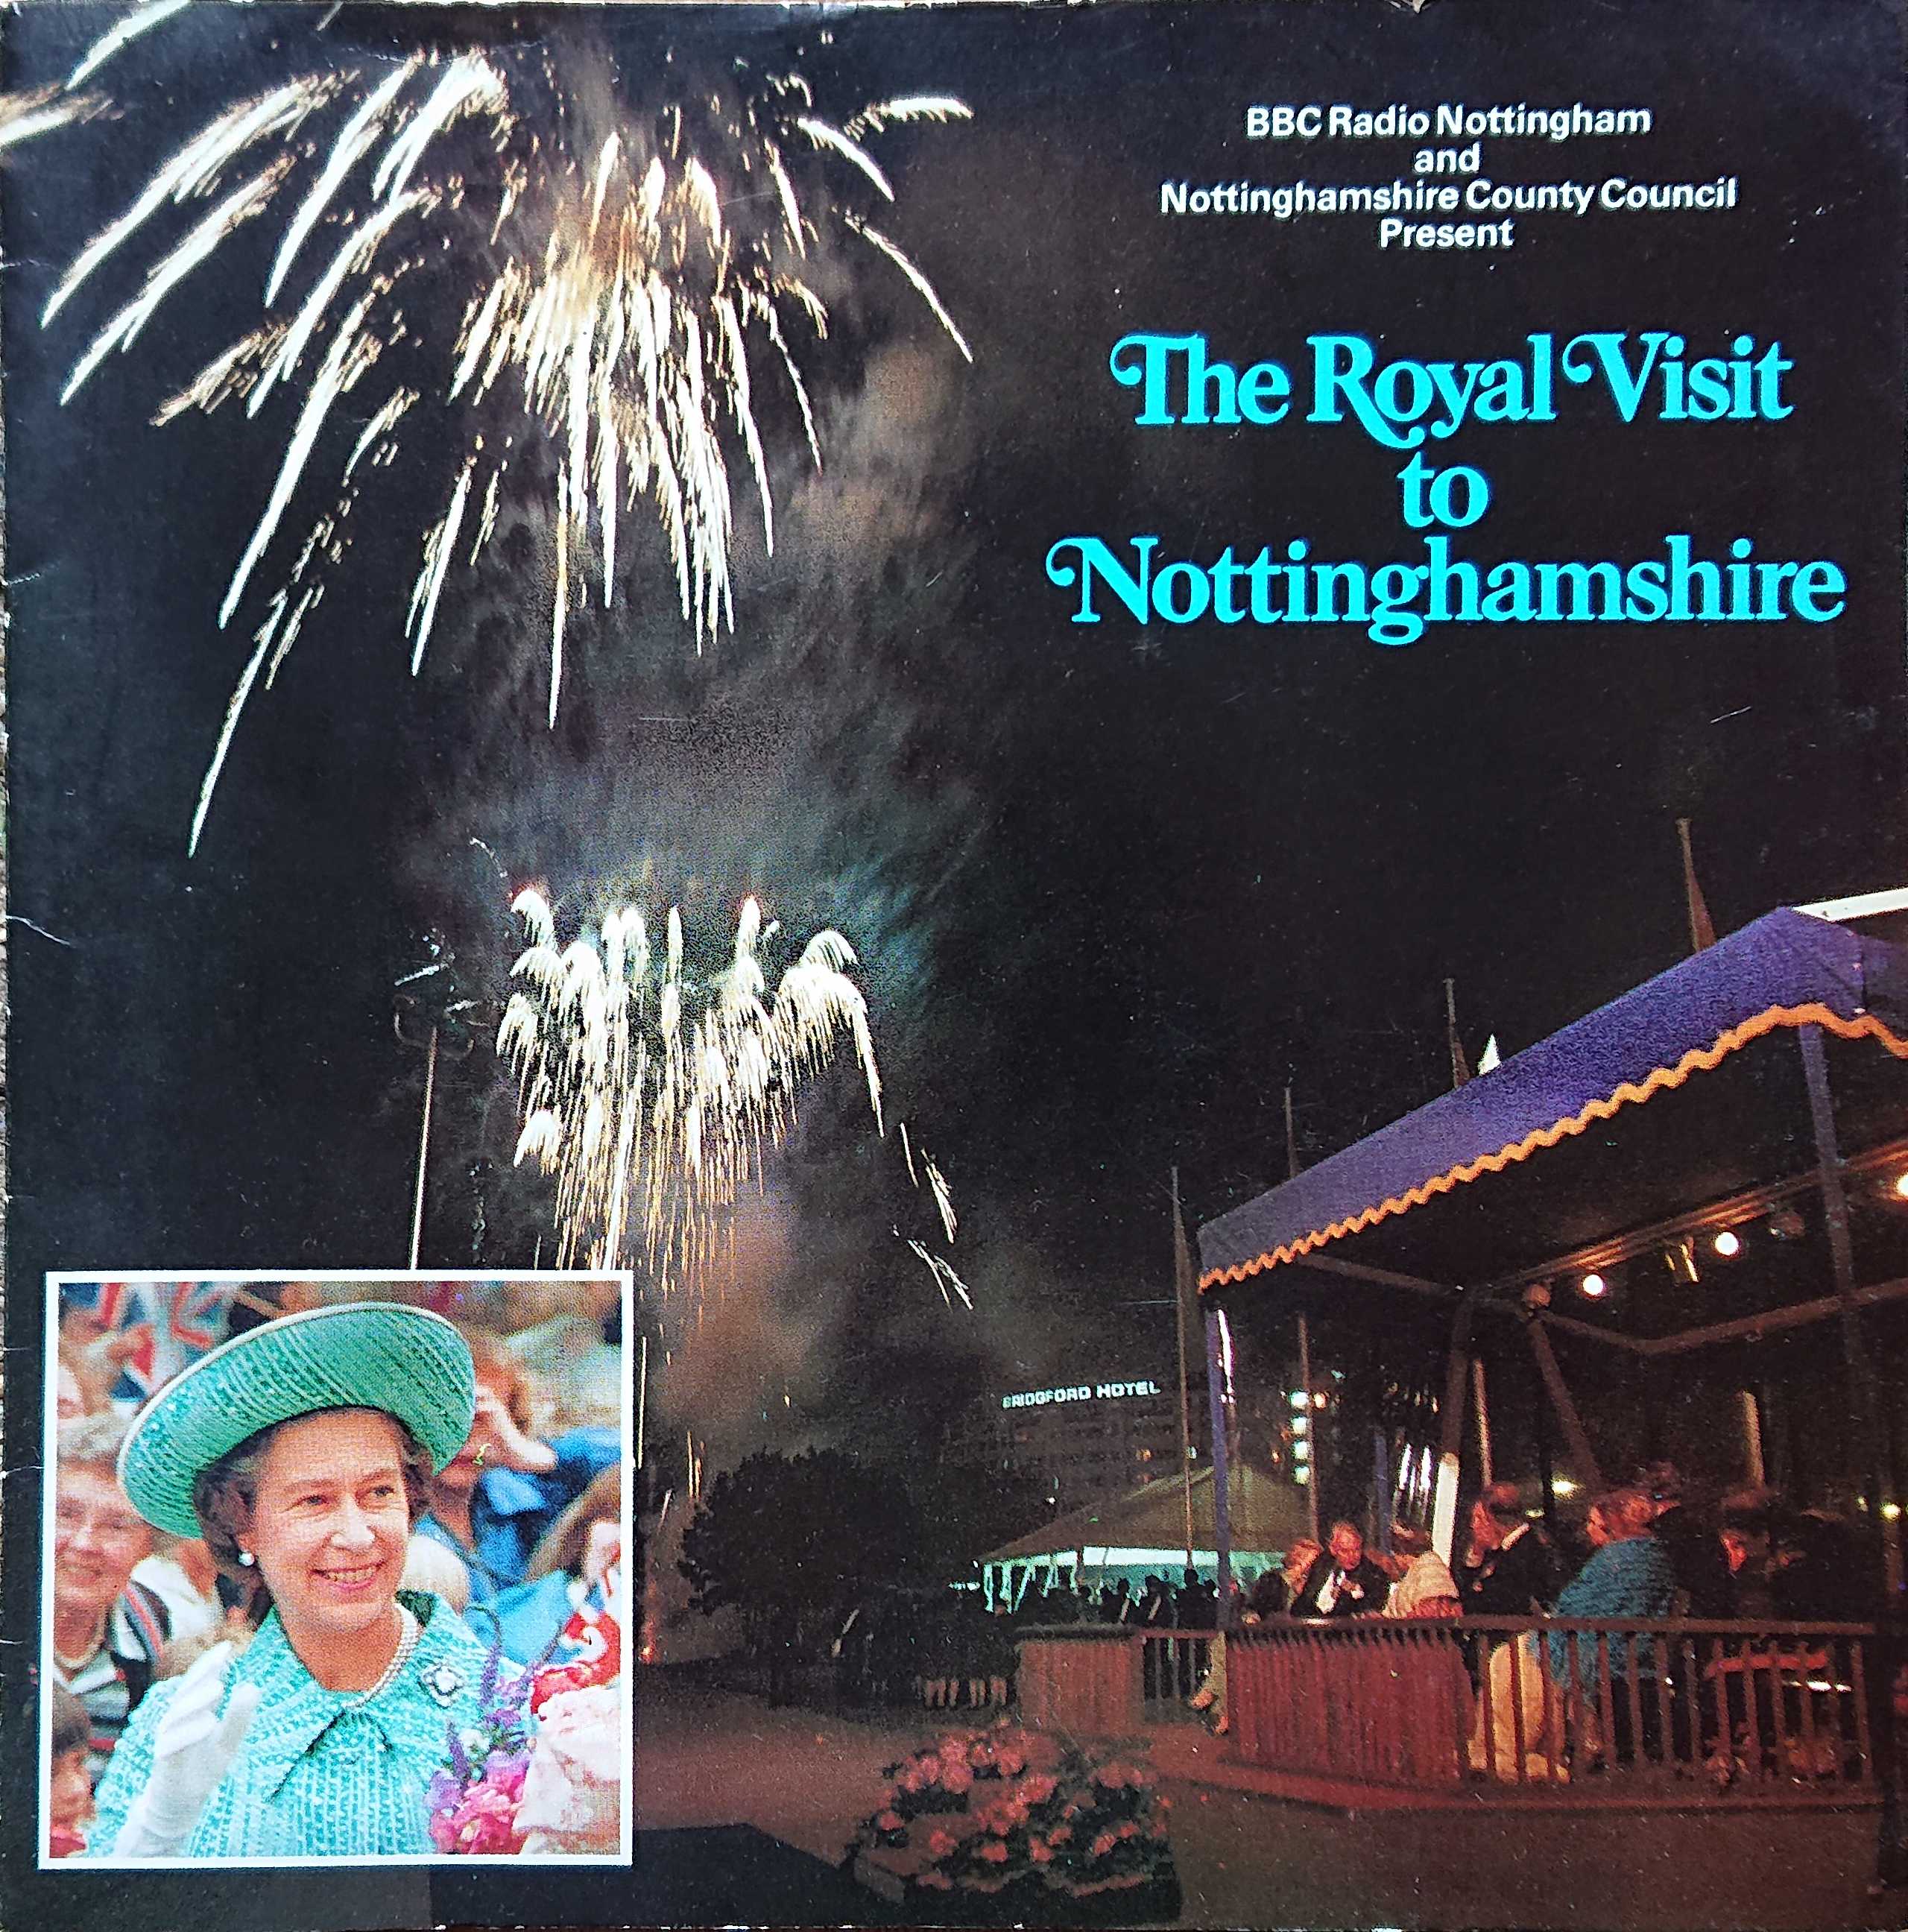 Picture of NG - 1 The Royal visit to Nottinghamshire by artist Dennis McCarthy / John Lilley / Alastair McDougall / Sandi Marshall from the BBC records and Tapes library